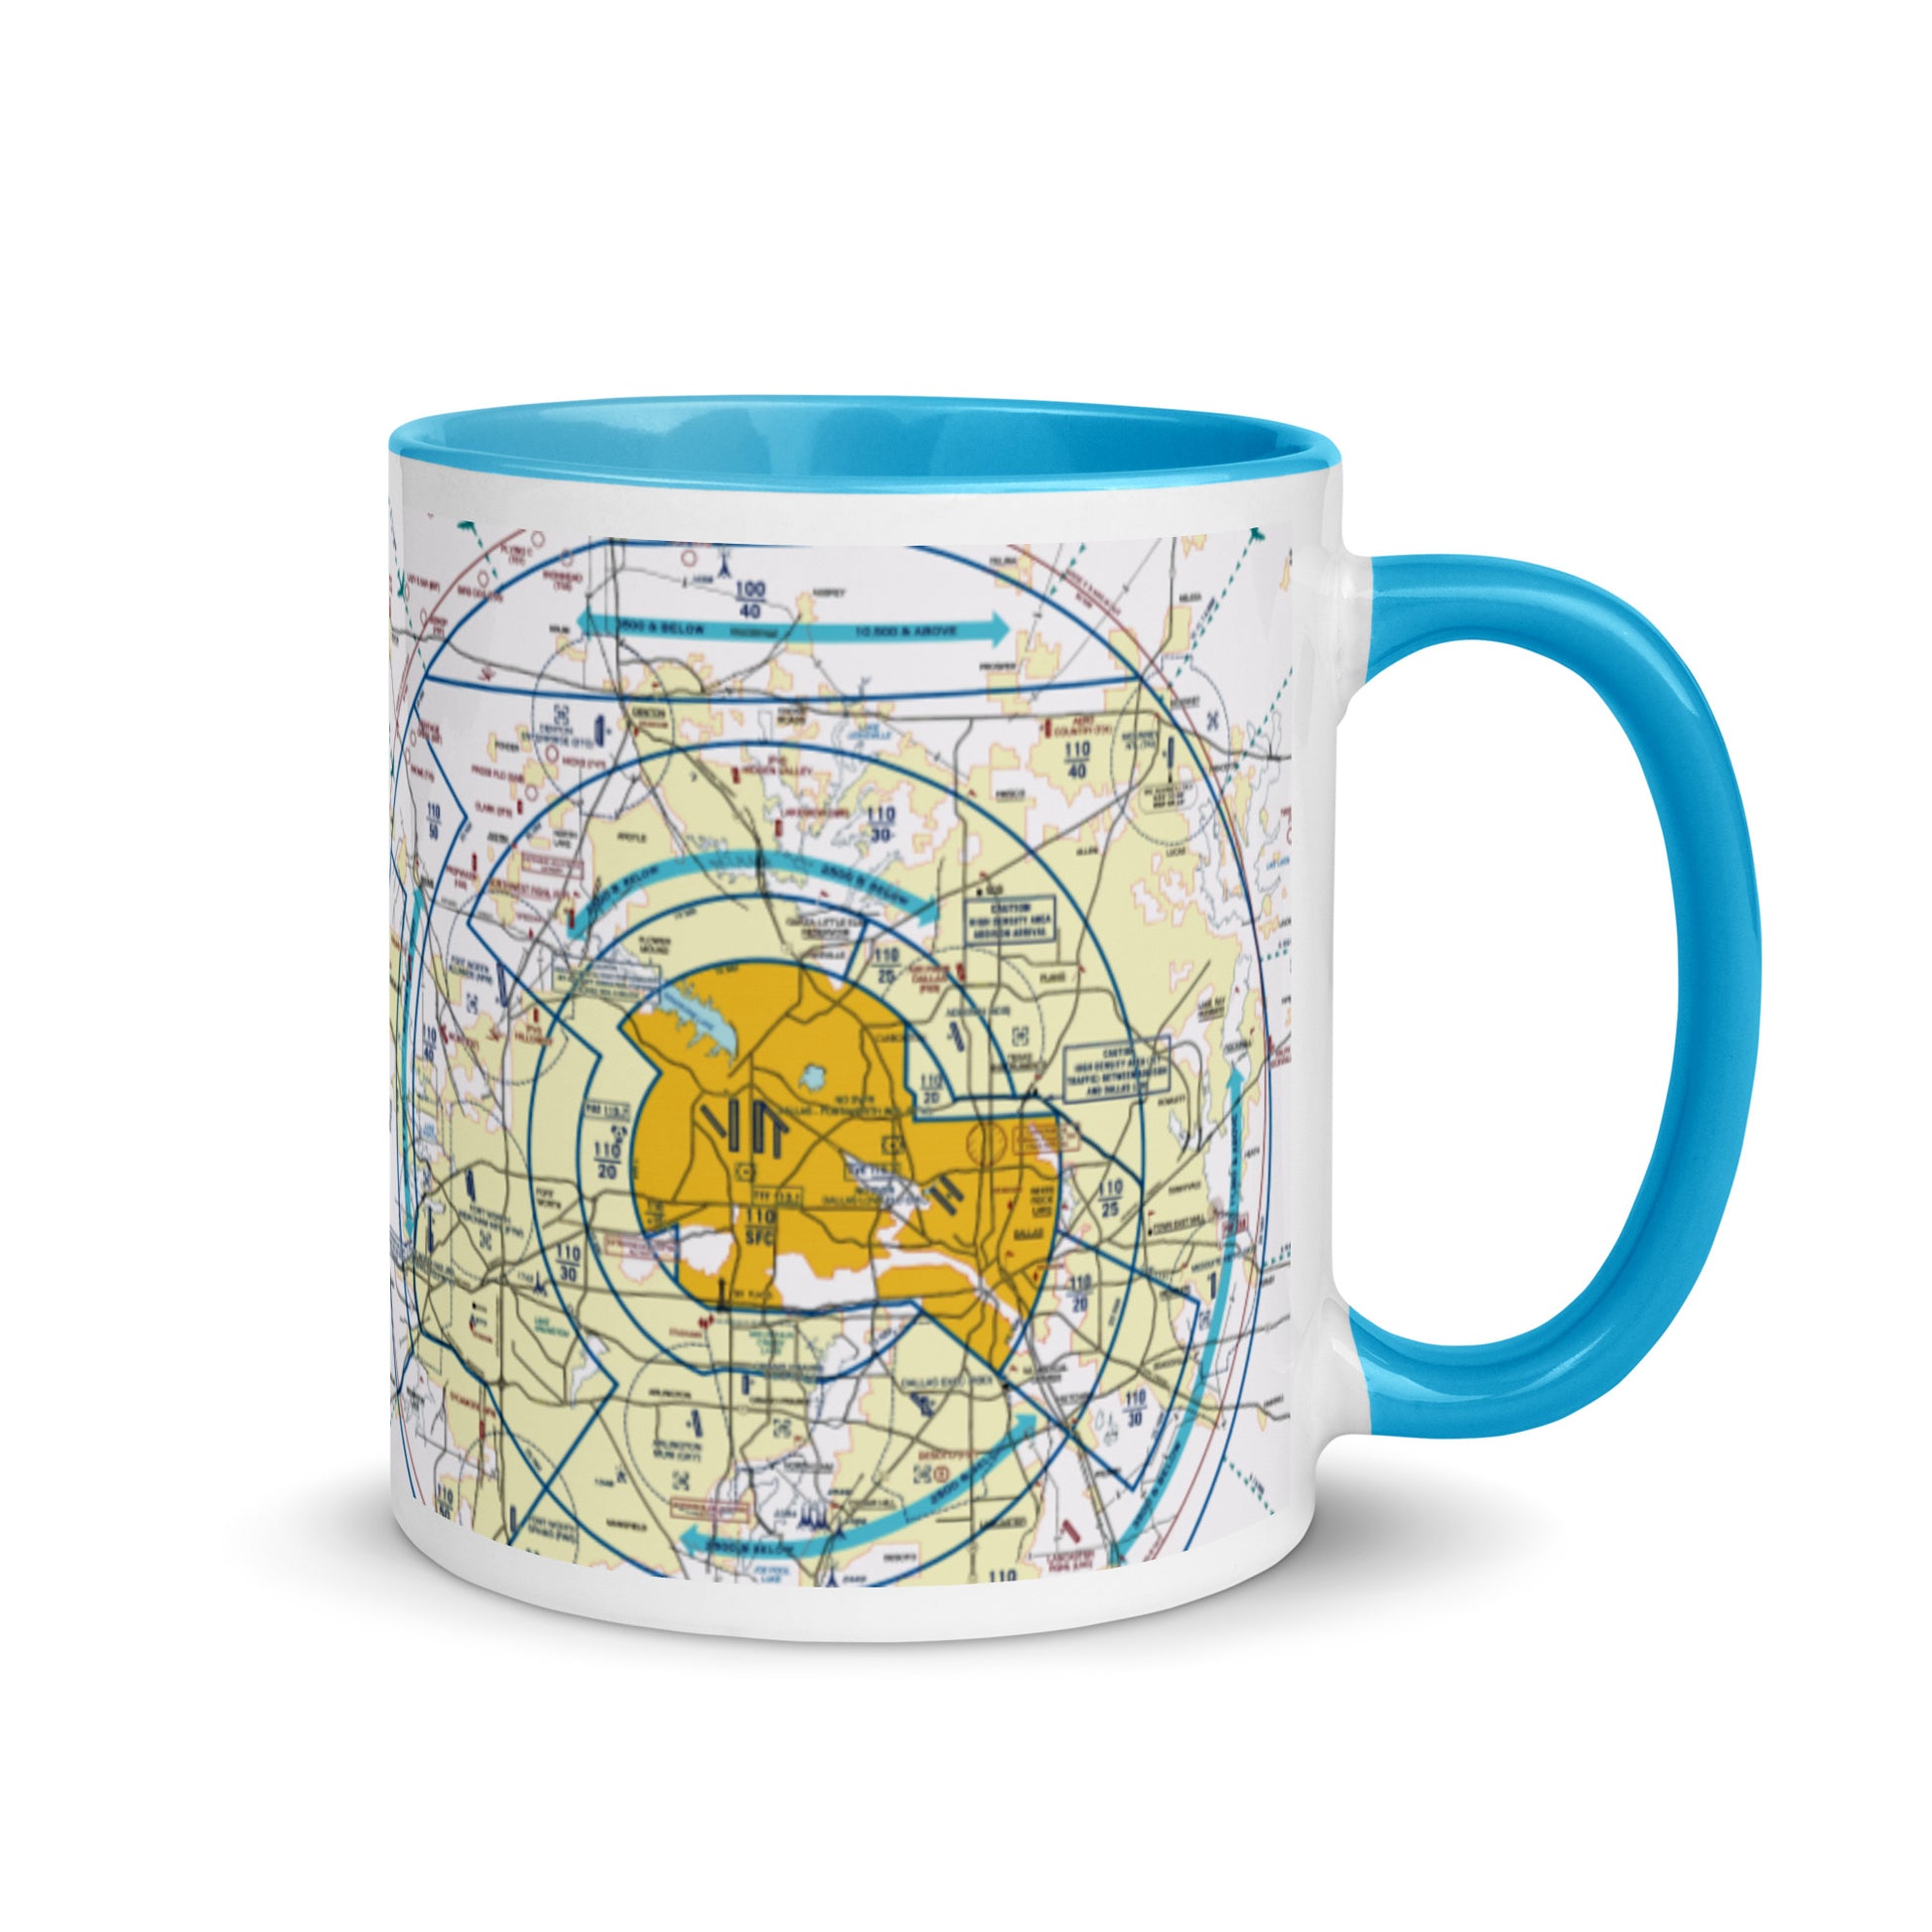 Dallas - Ft. Worth Flyway Chart 11 oz. mug with color inside